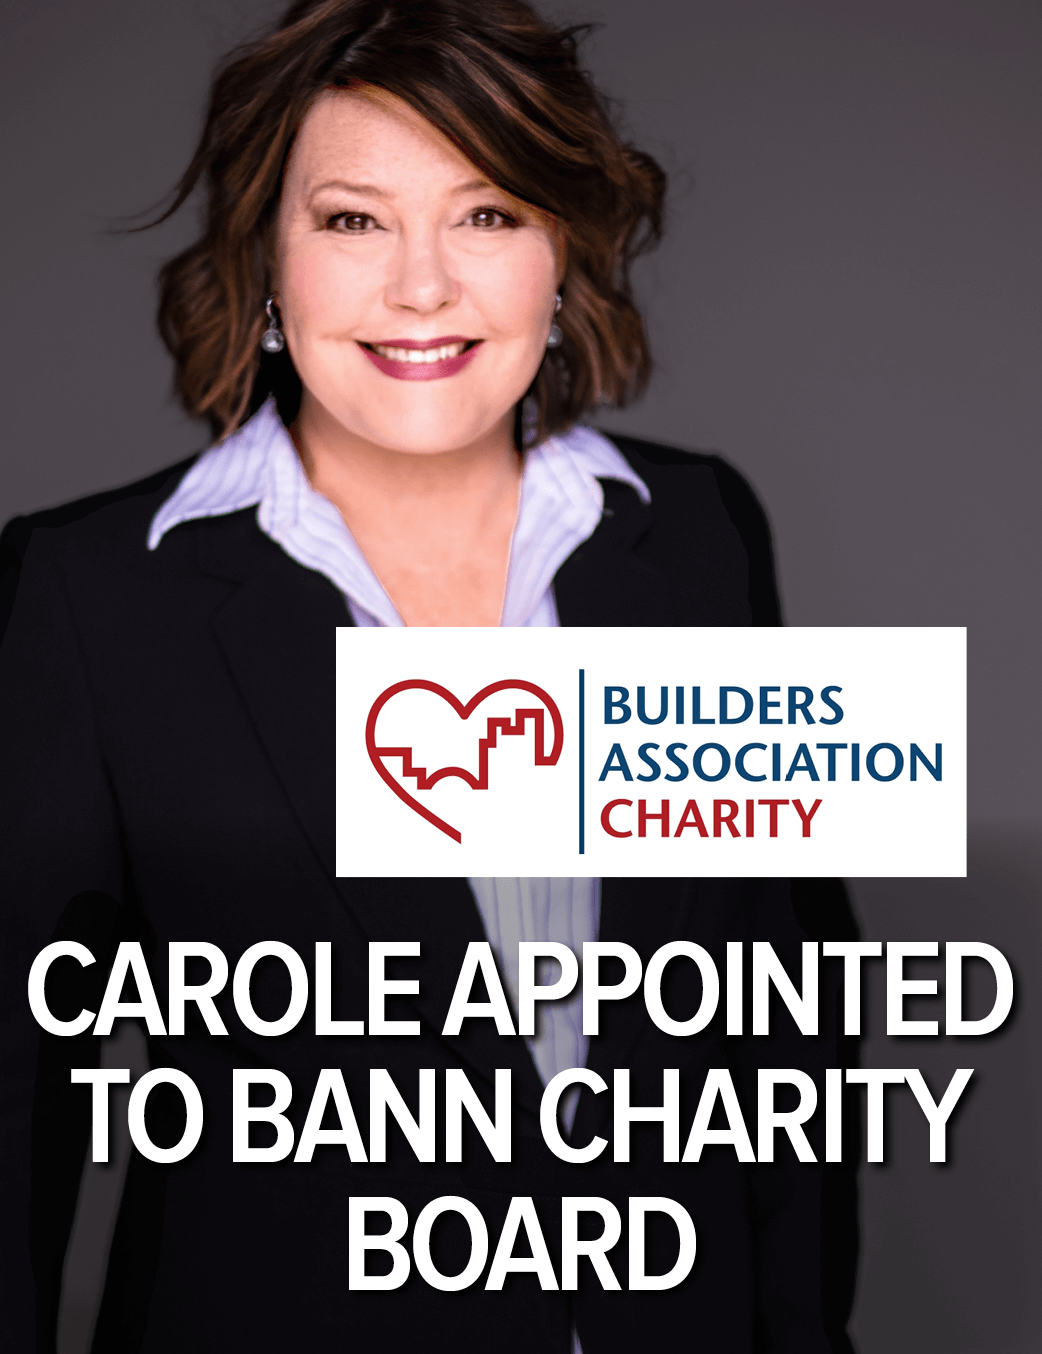 Carole Brill Appointed to BANN Charity Board